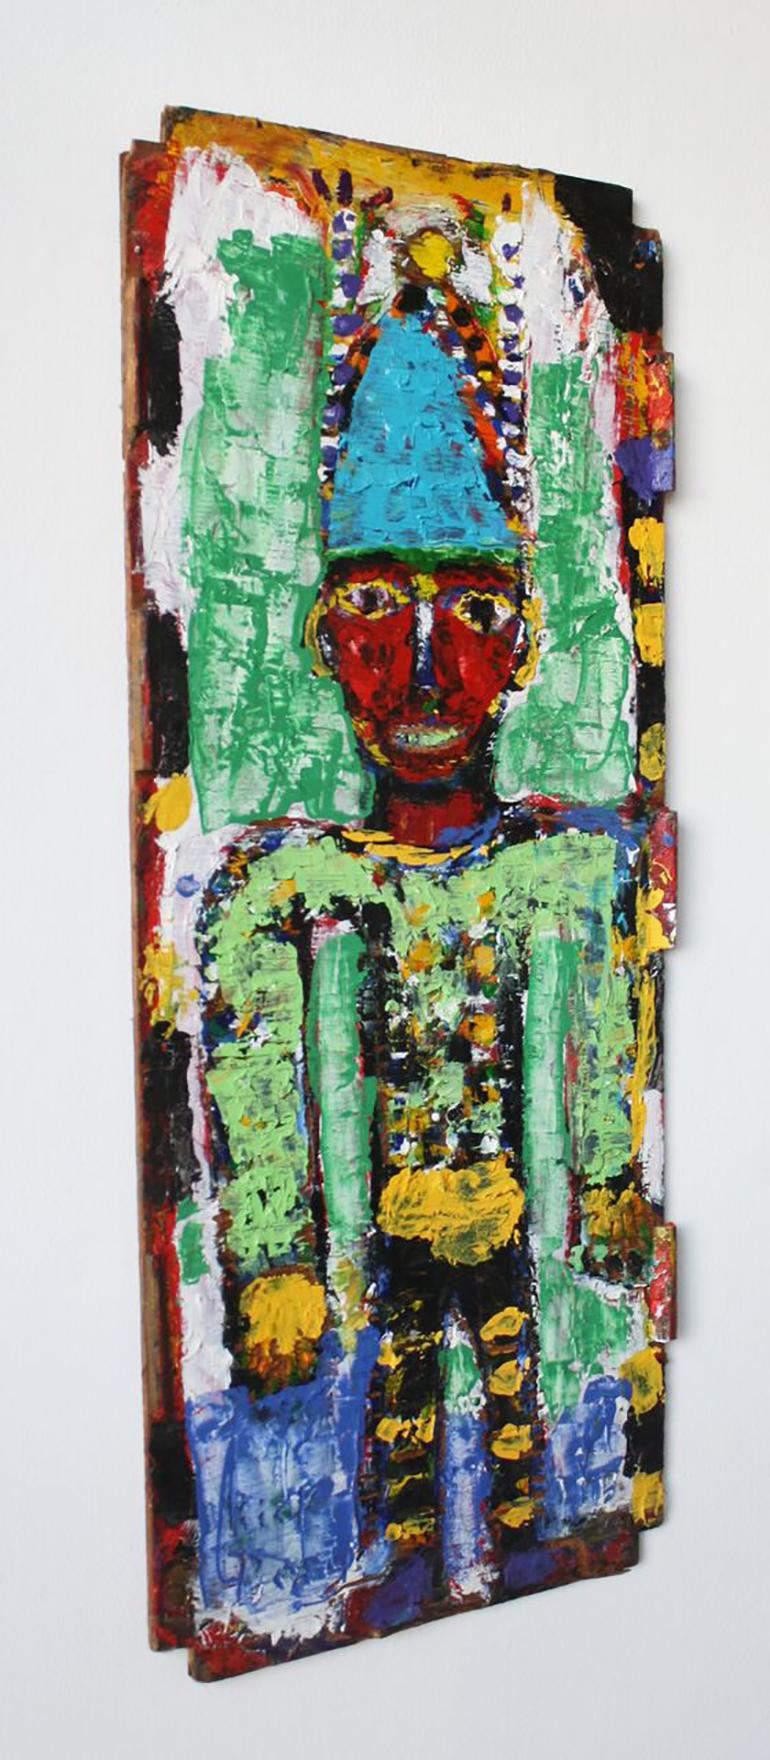 Clown with Antennas on Found Wood//Folk Art - Painting by Rick Borg